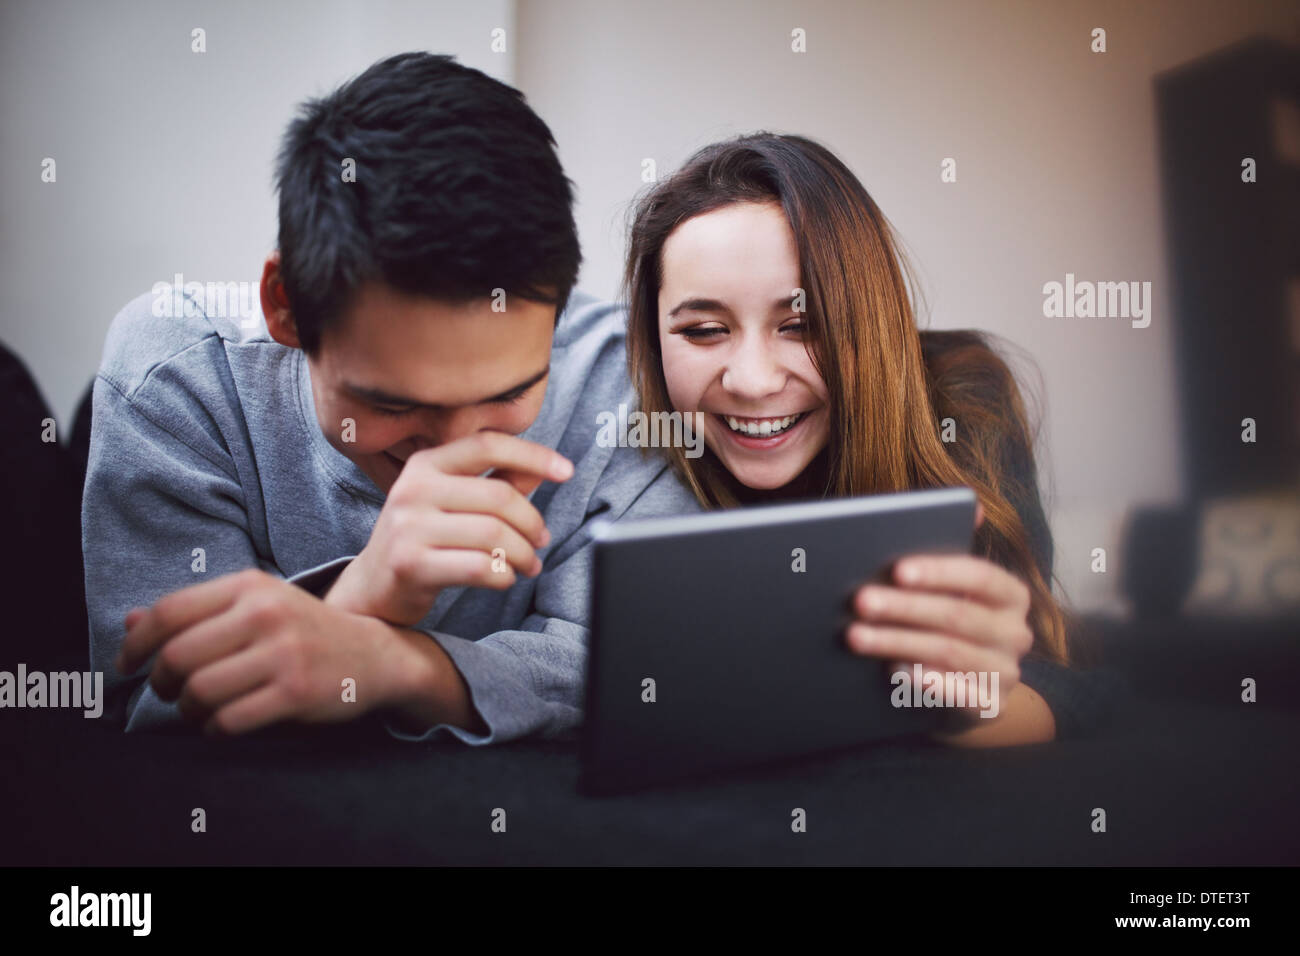 Happy young man and woman using tablet PC. Mixed race teenage couple using digital tablet smiling while lying on sofa at home. Stock Photo